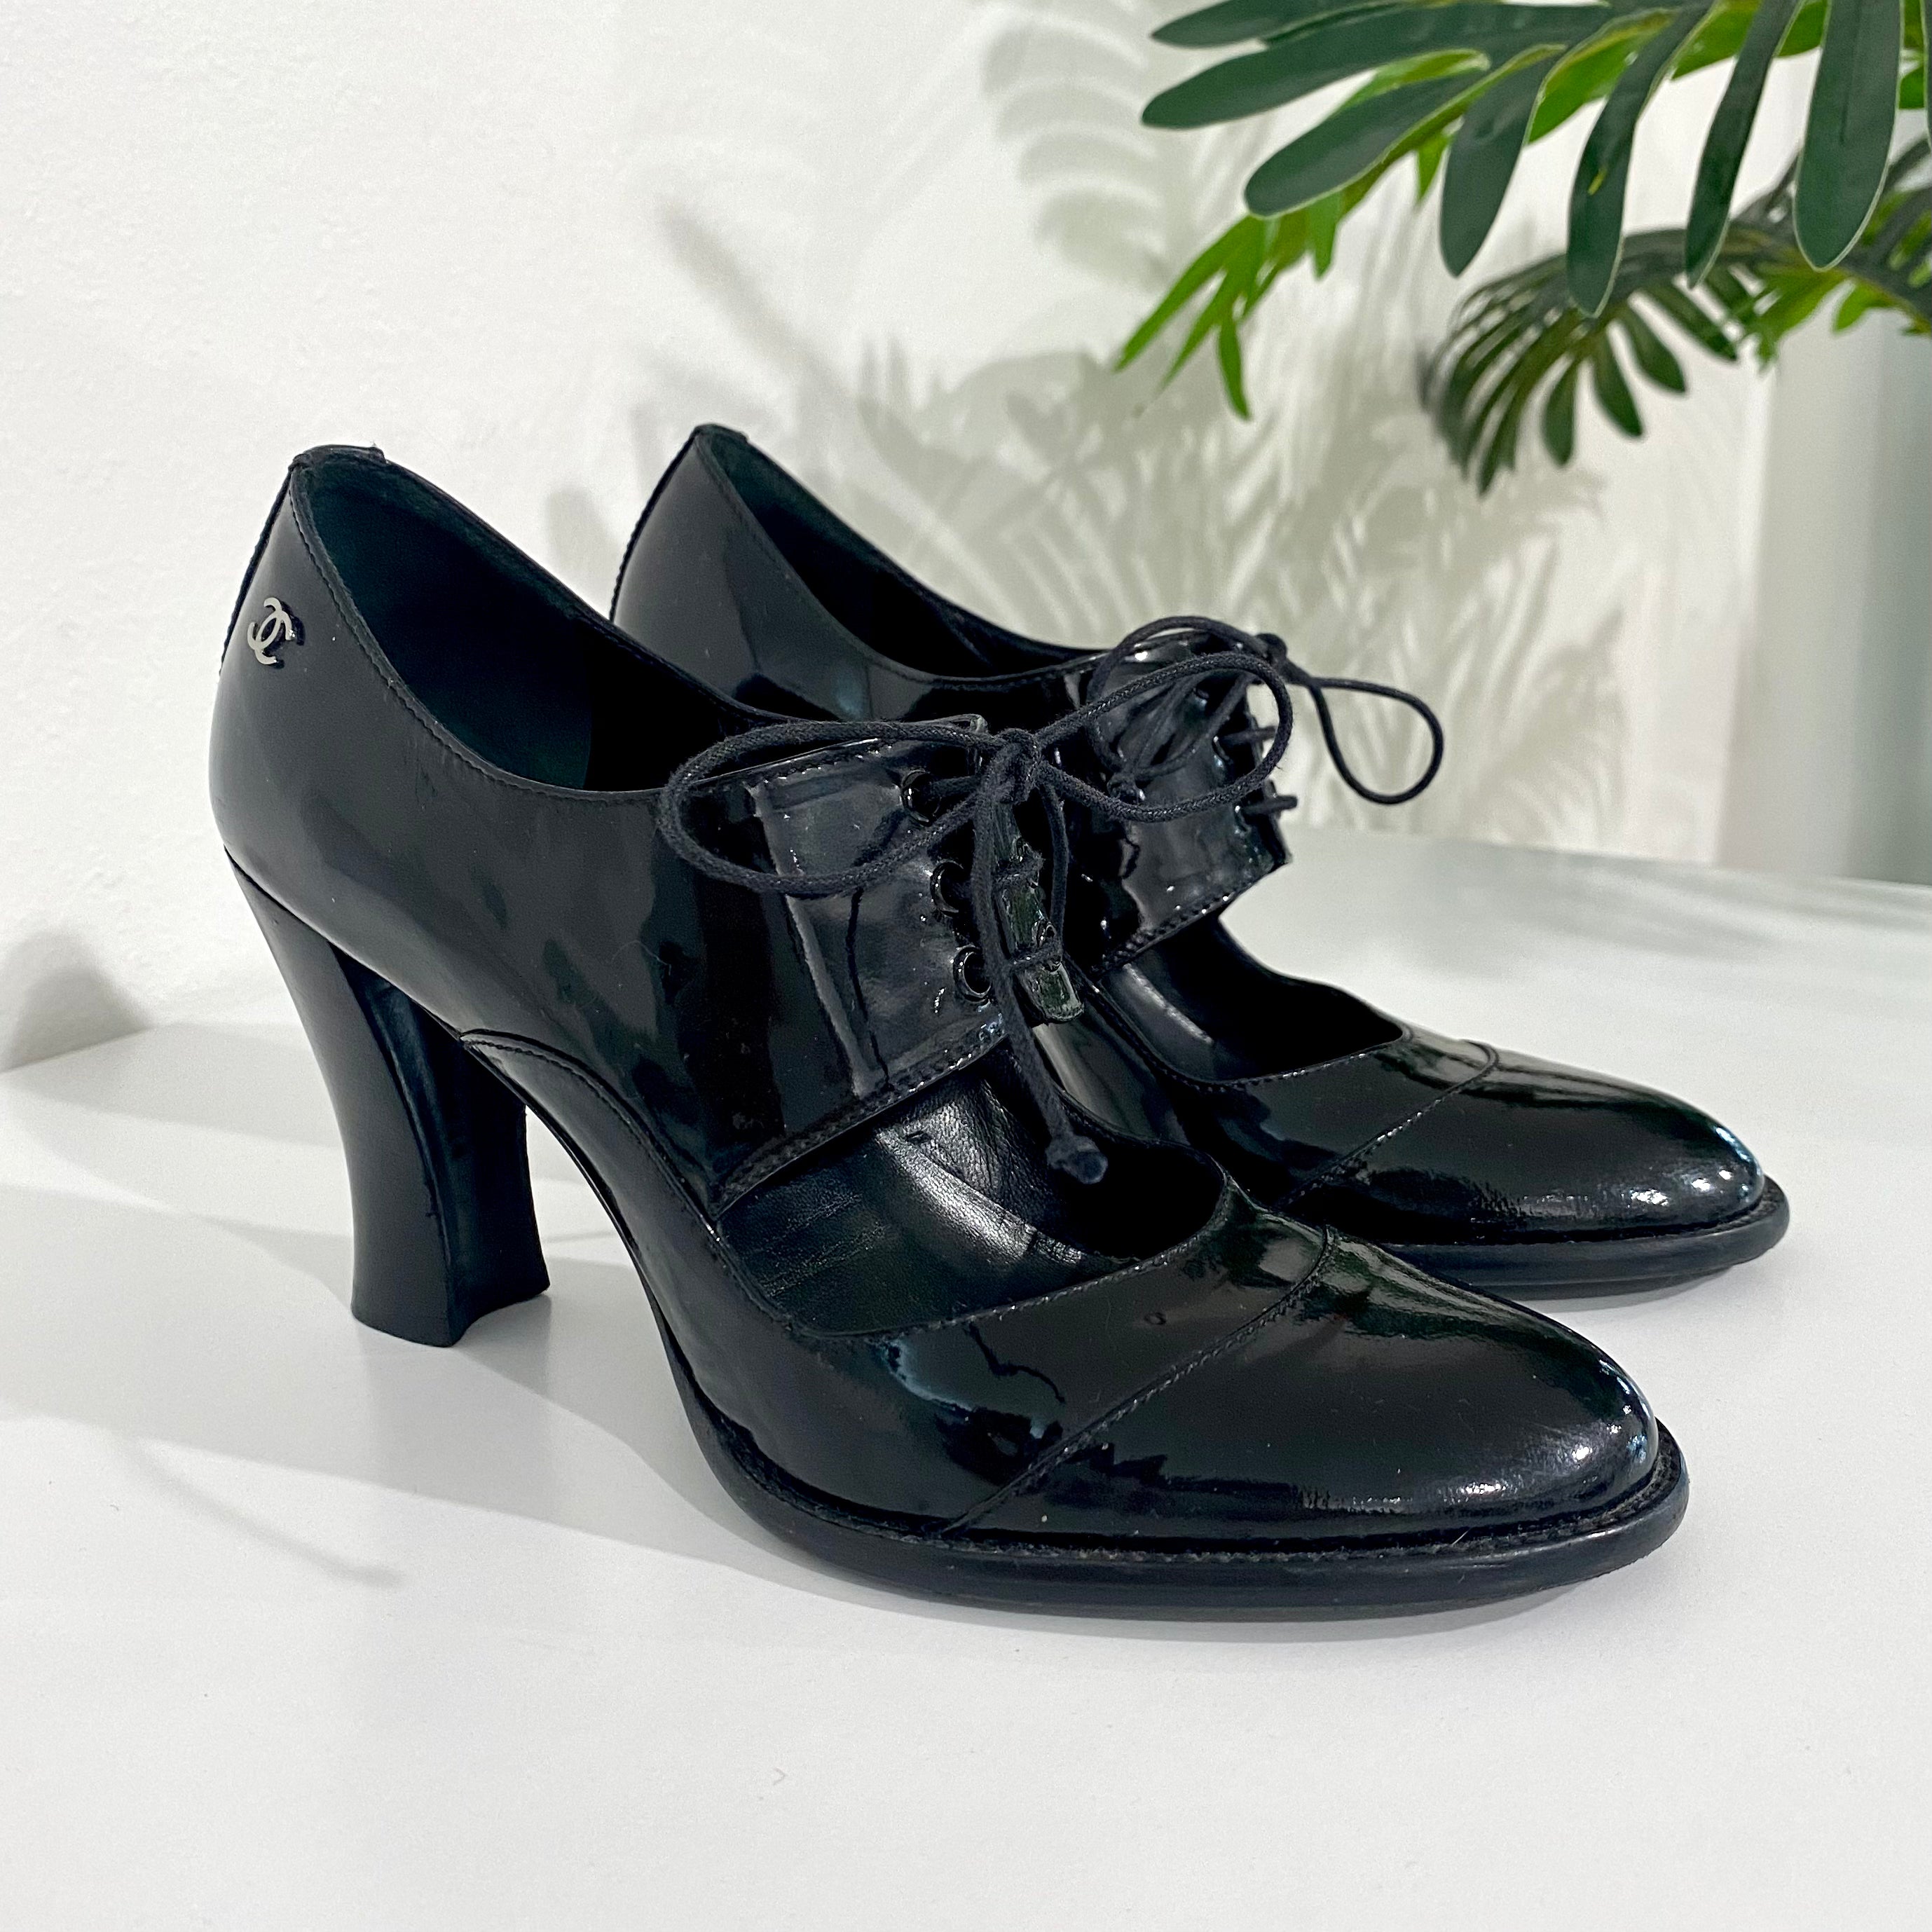 chanel patent leather shoes